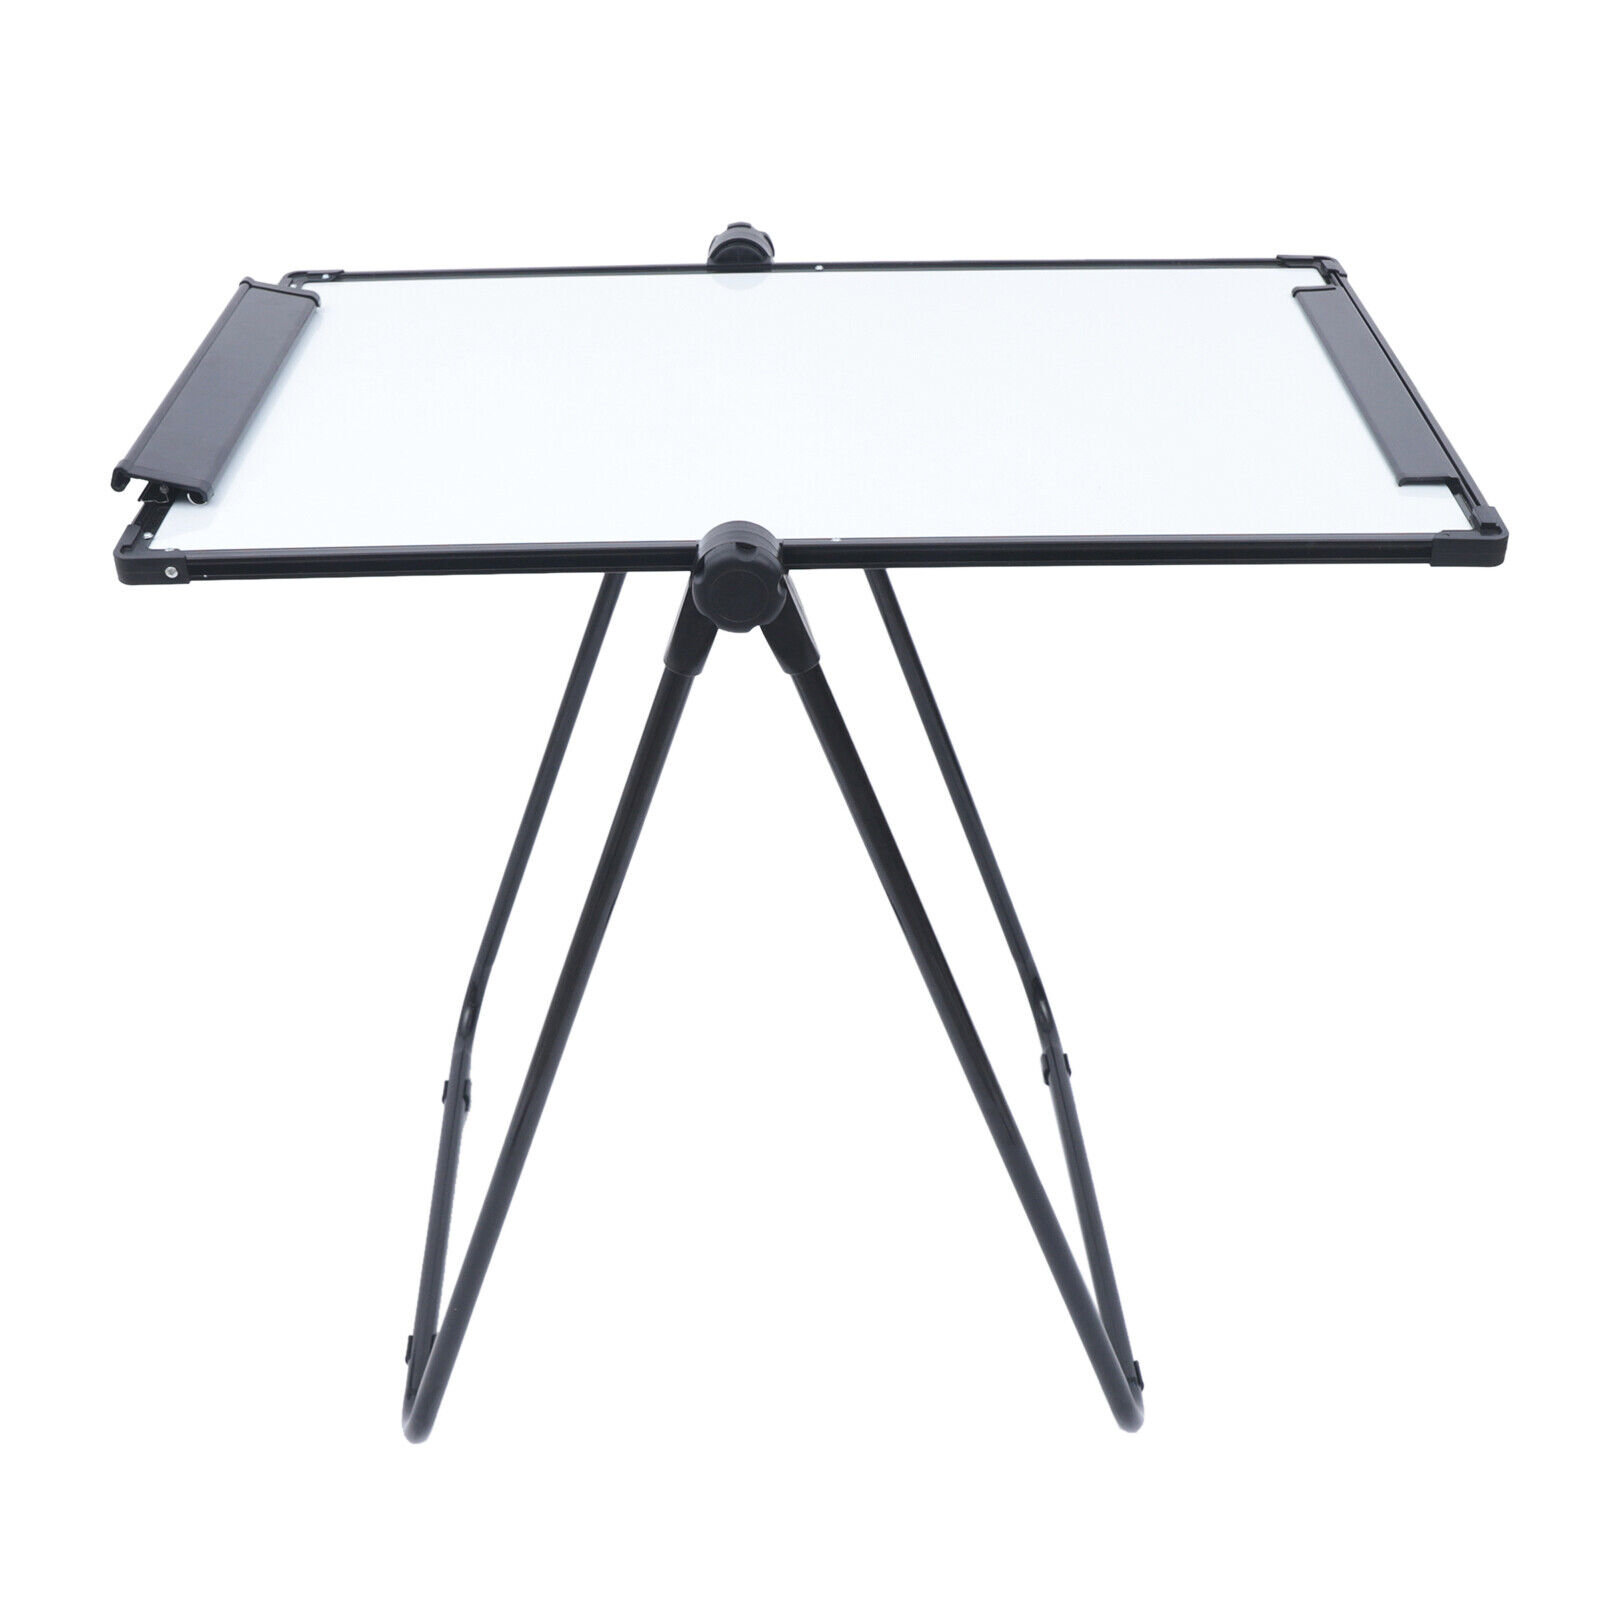 Whiteboard 4-sided, foldable, magnetic, dry erasable